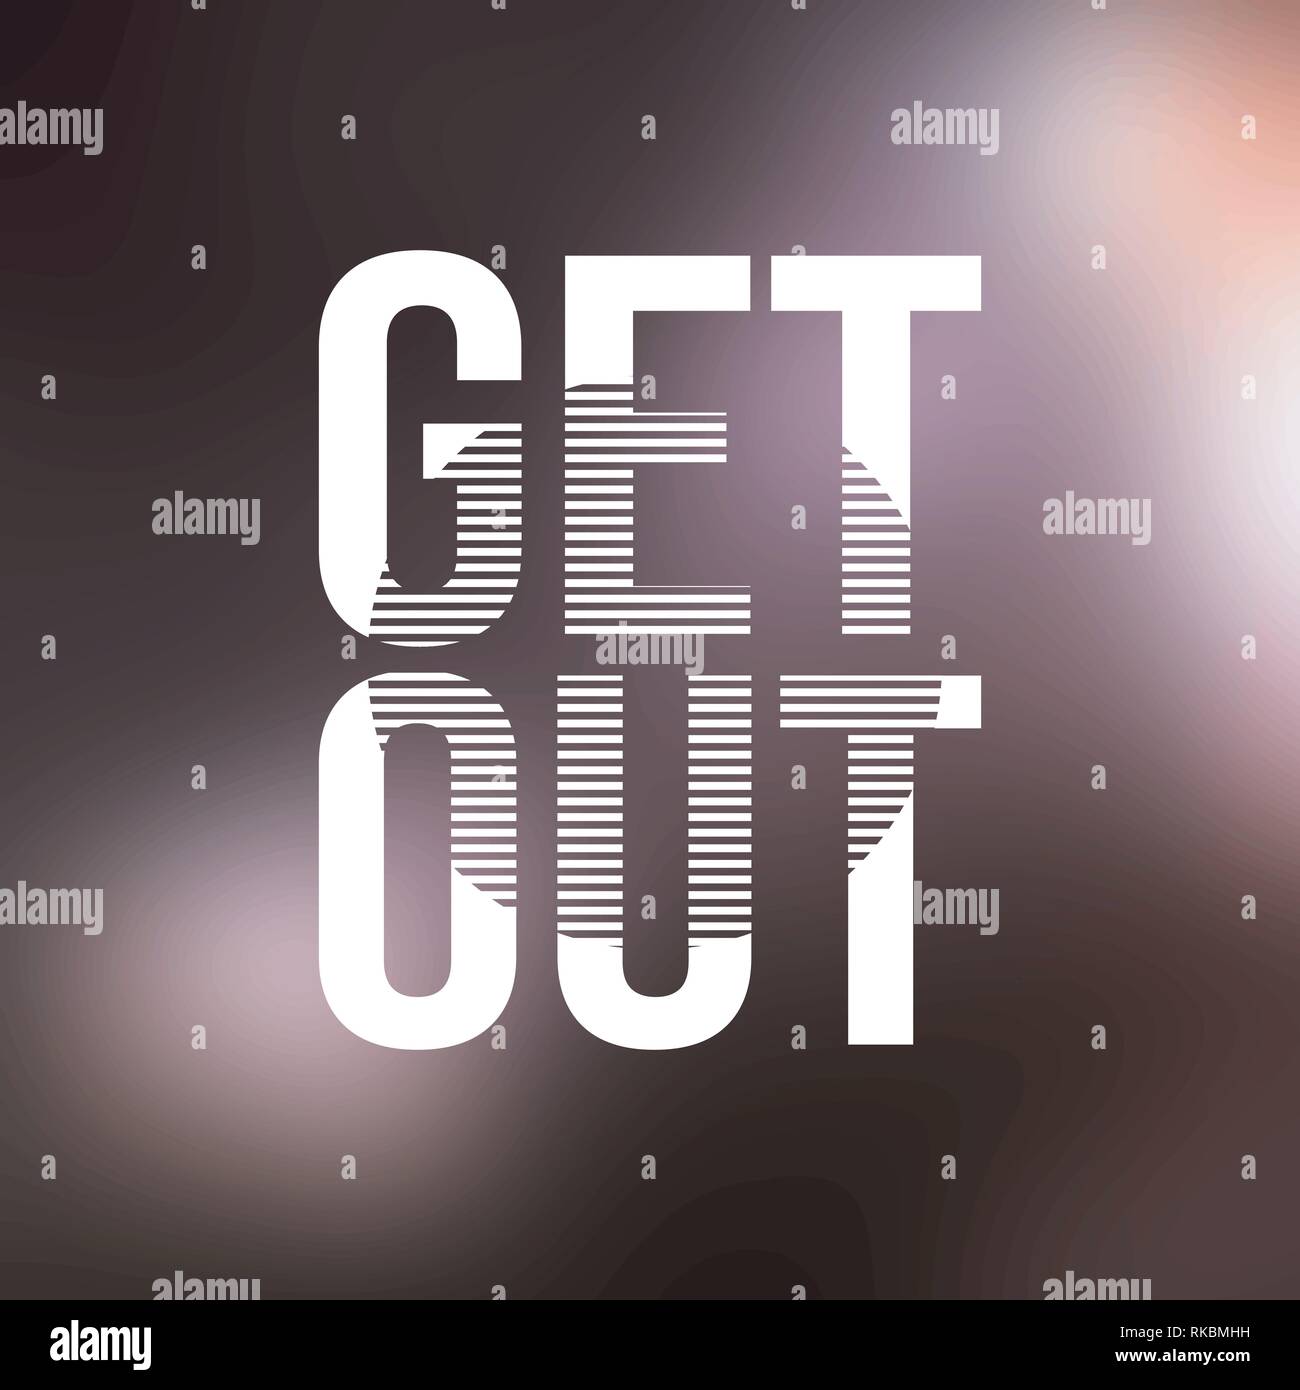 get out. Life quote with modern background vector illustration Stock Vector